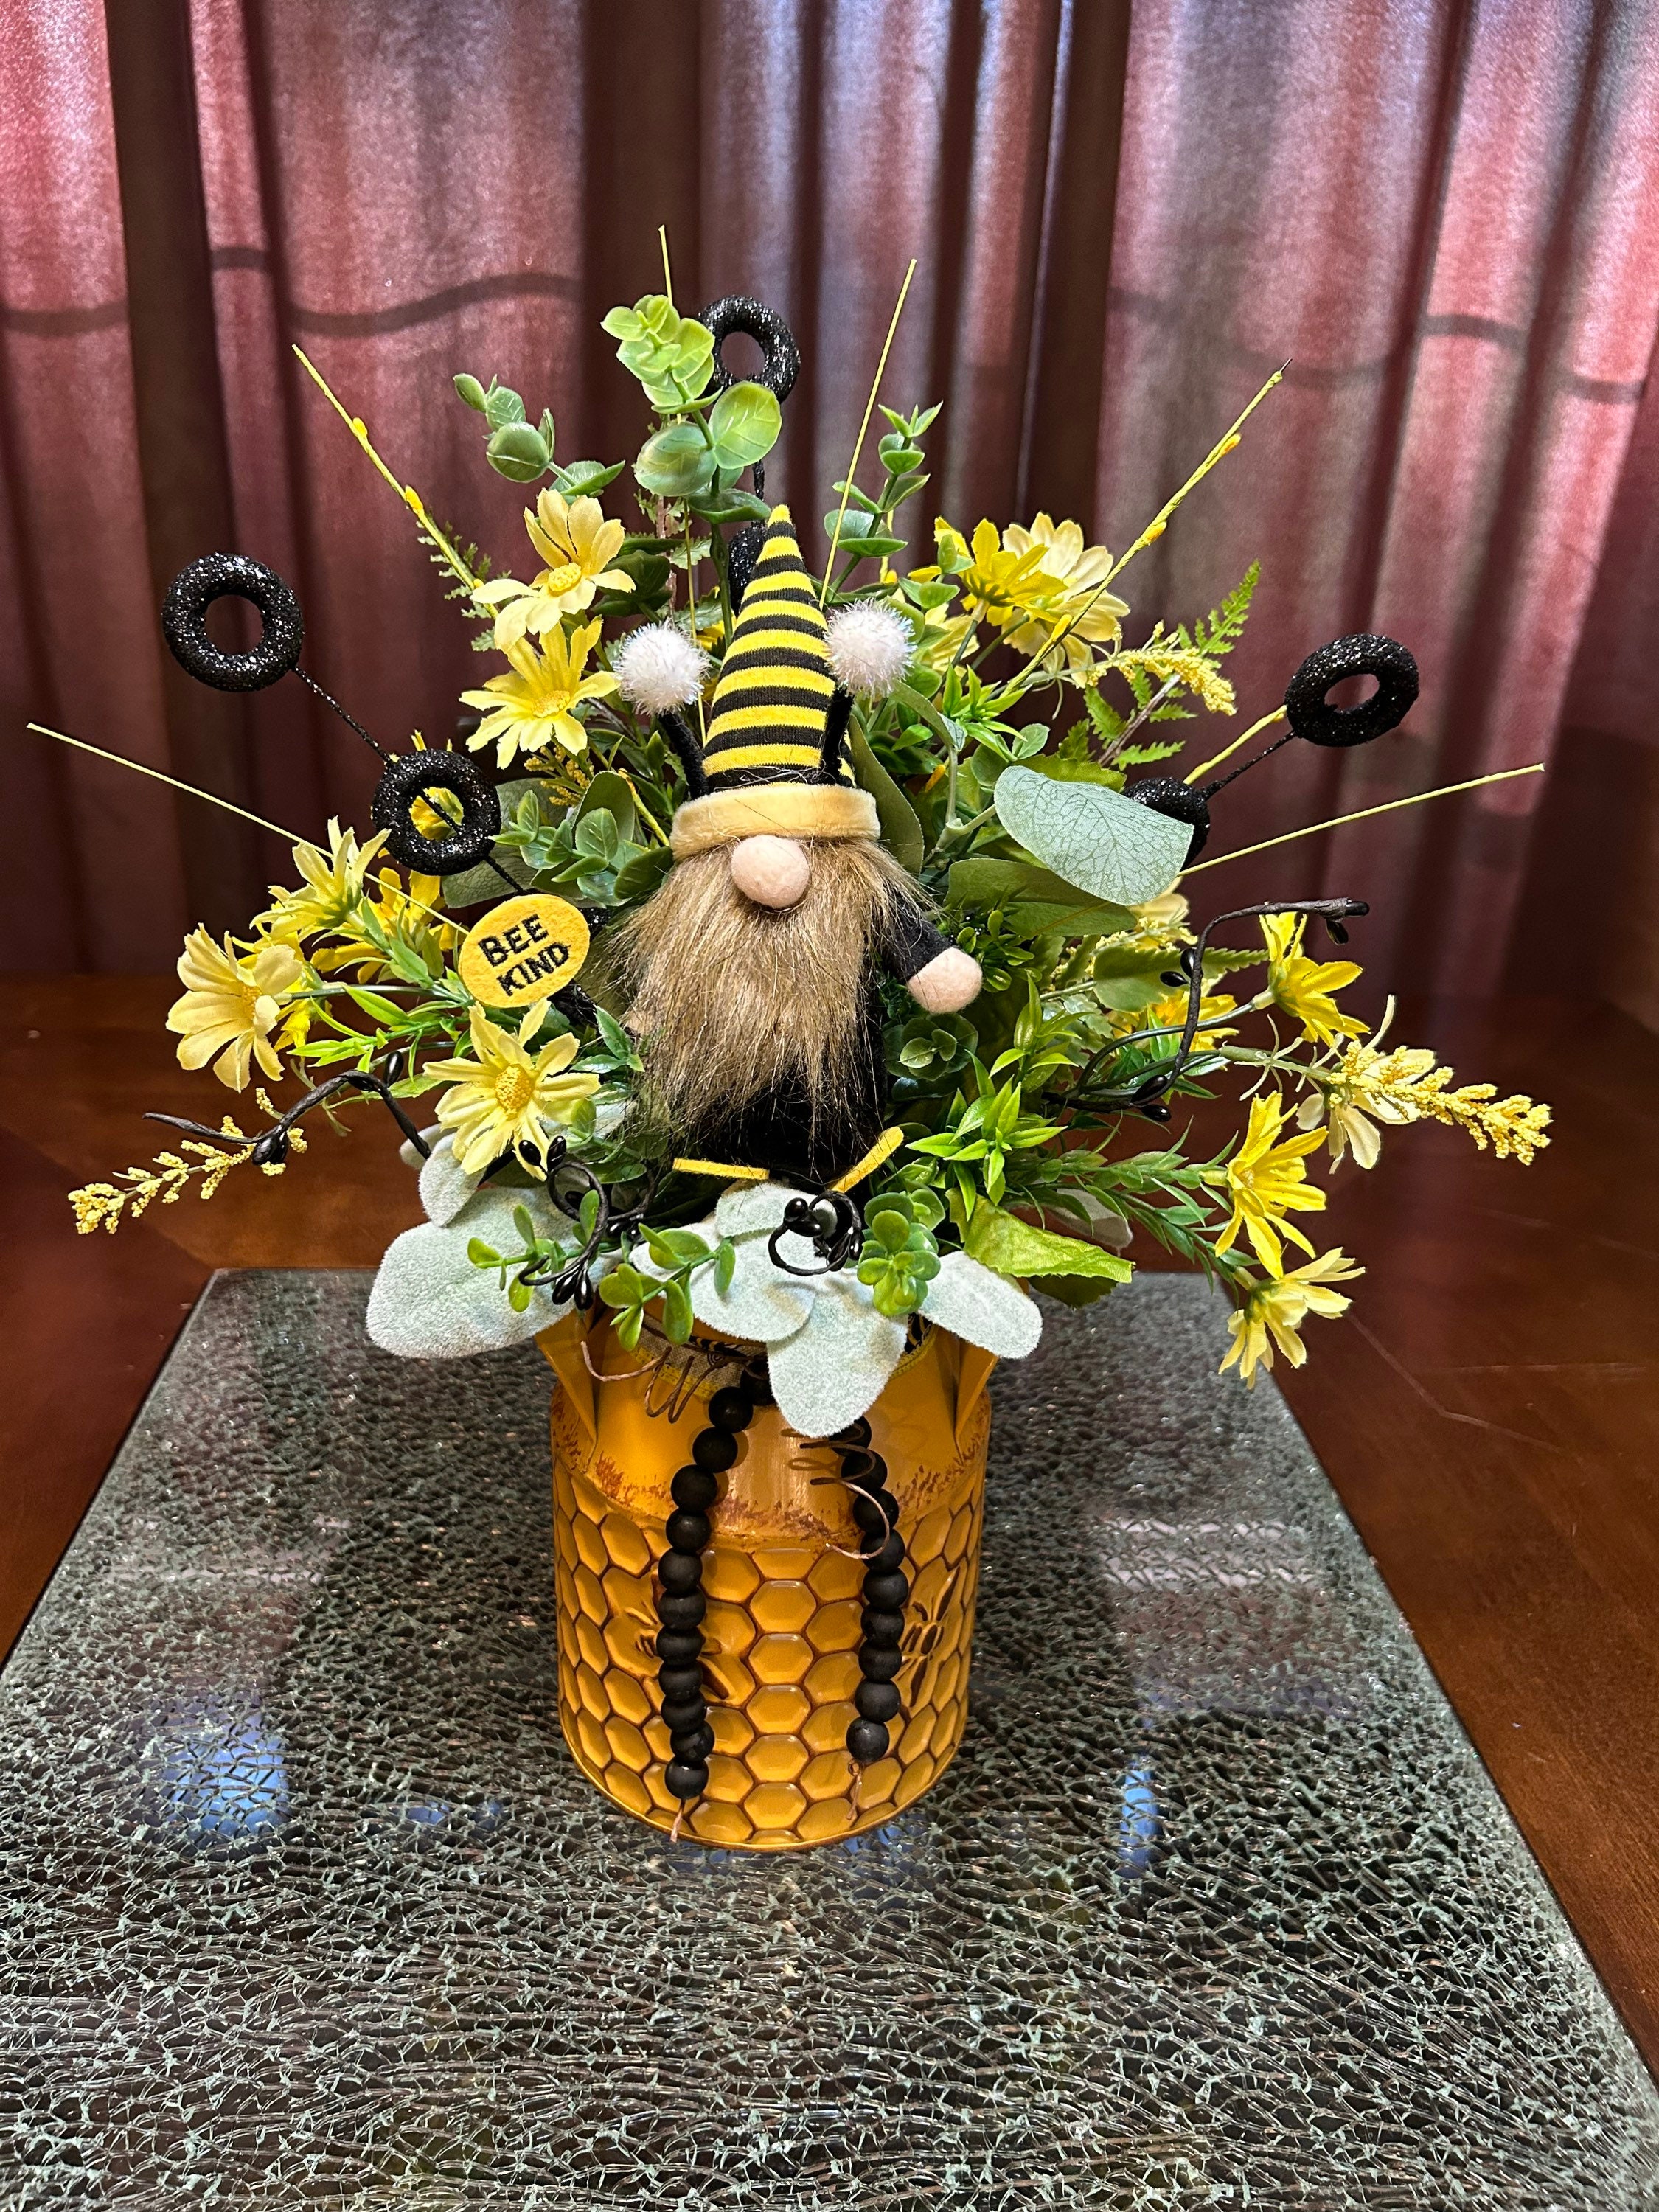 Faisichocalato 18 Pieces Bumble Bee Party Centerpieces for Honey Bee Baby Shower Decorations Table Centerpieces with Sticks Bee Birthday par